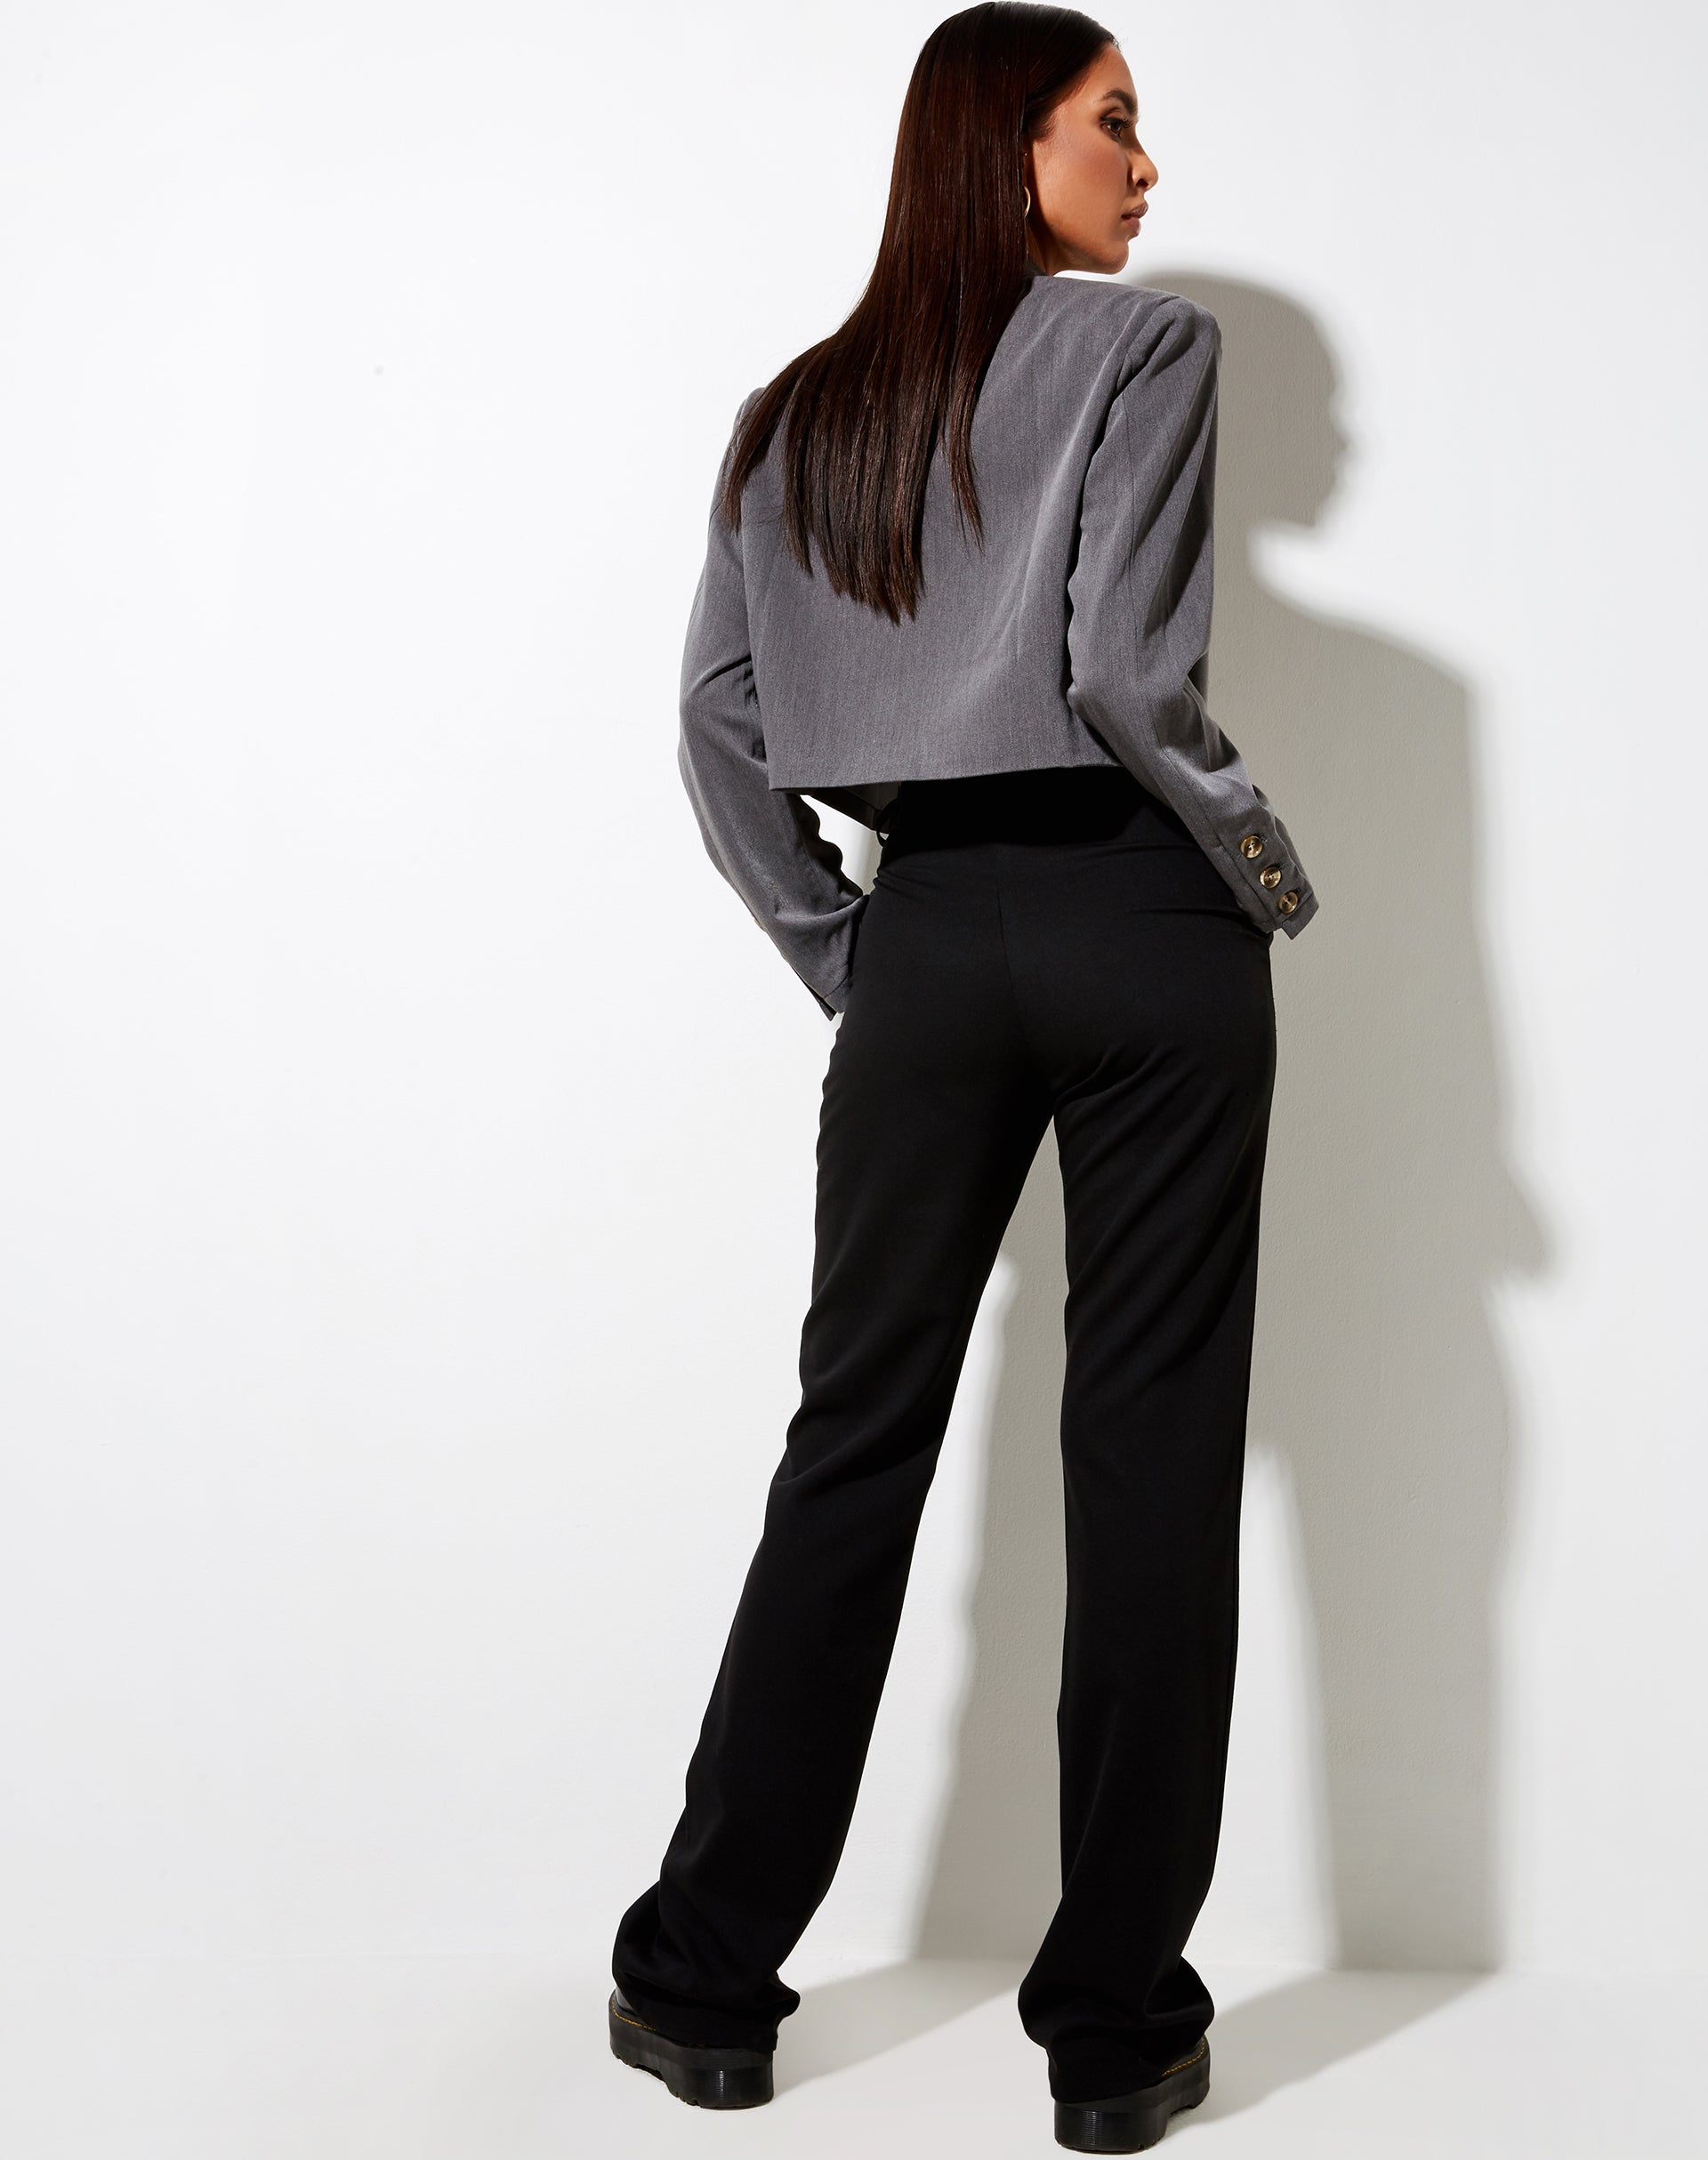 Zorea Trouser in PU Black with White Stitching